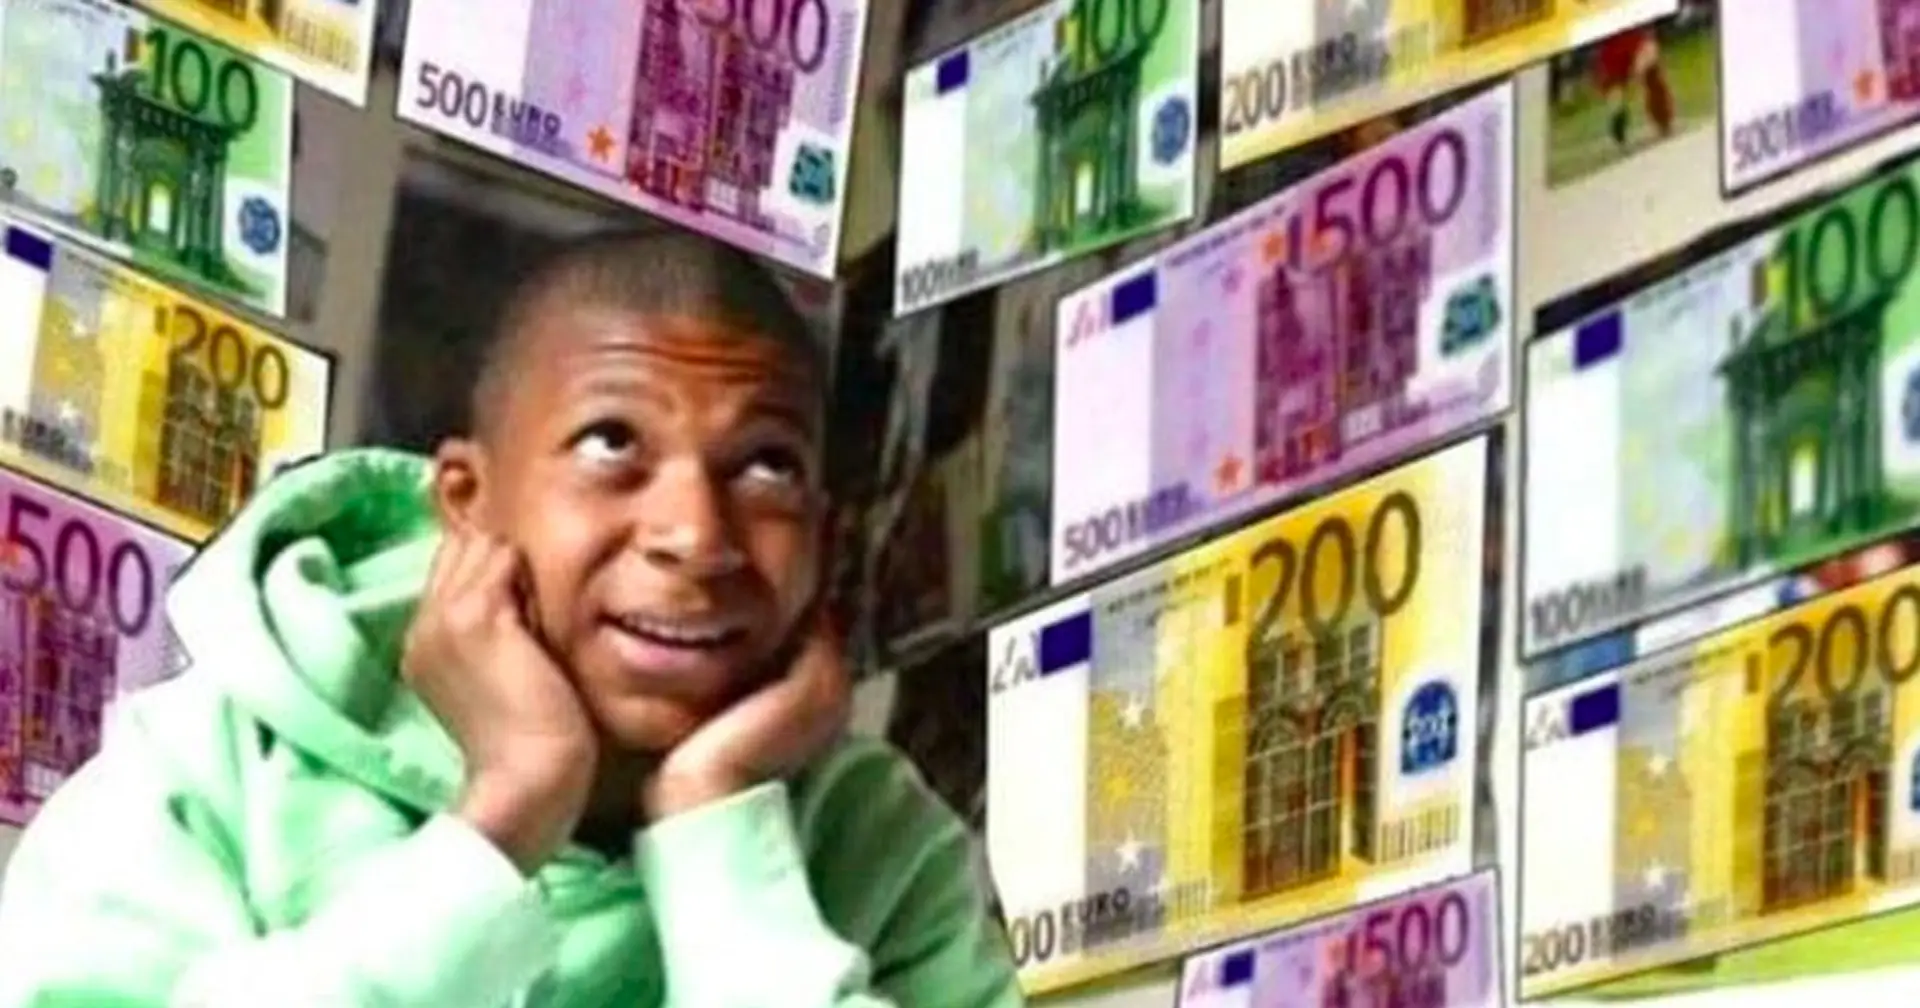 Mbappe will receive €130m signing bonus at Real Madrid (reliability: 5 stars)